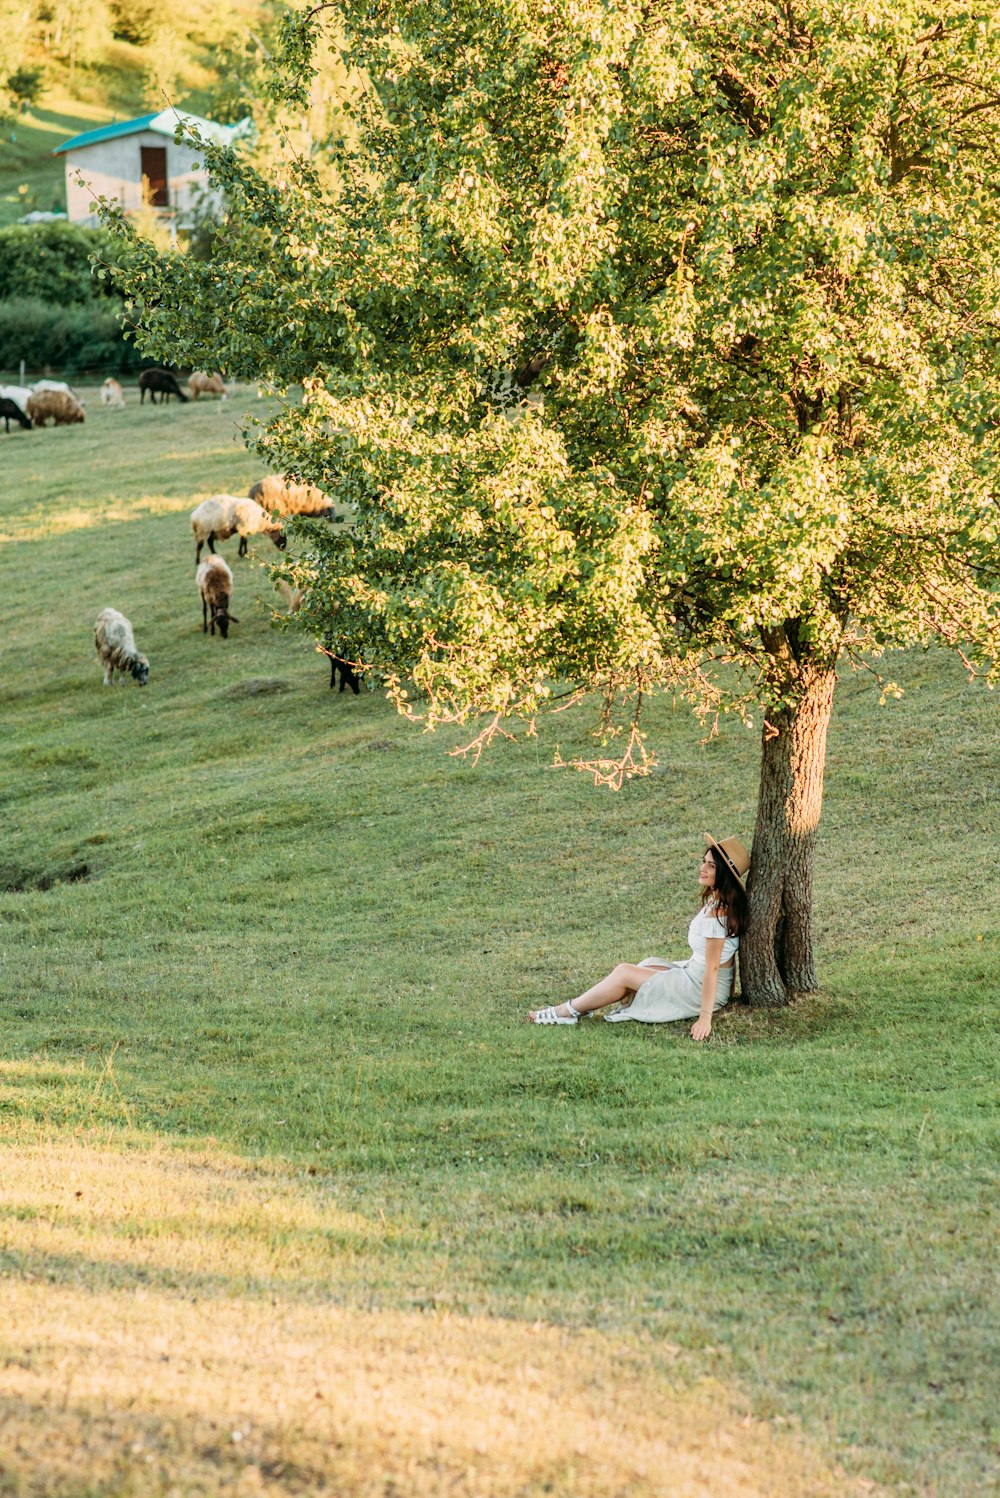 woman in white tank top lying on green grass field during daytime